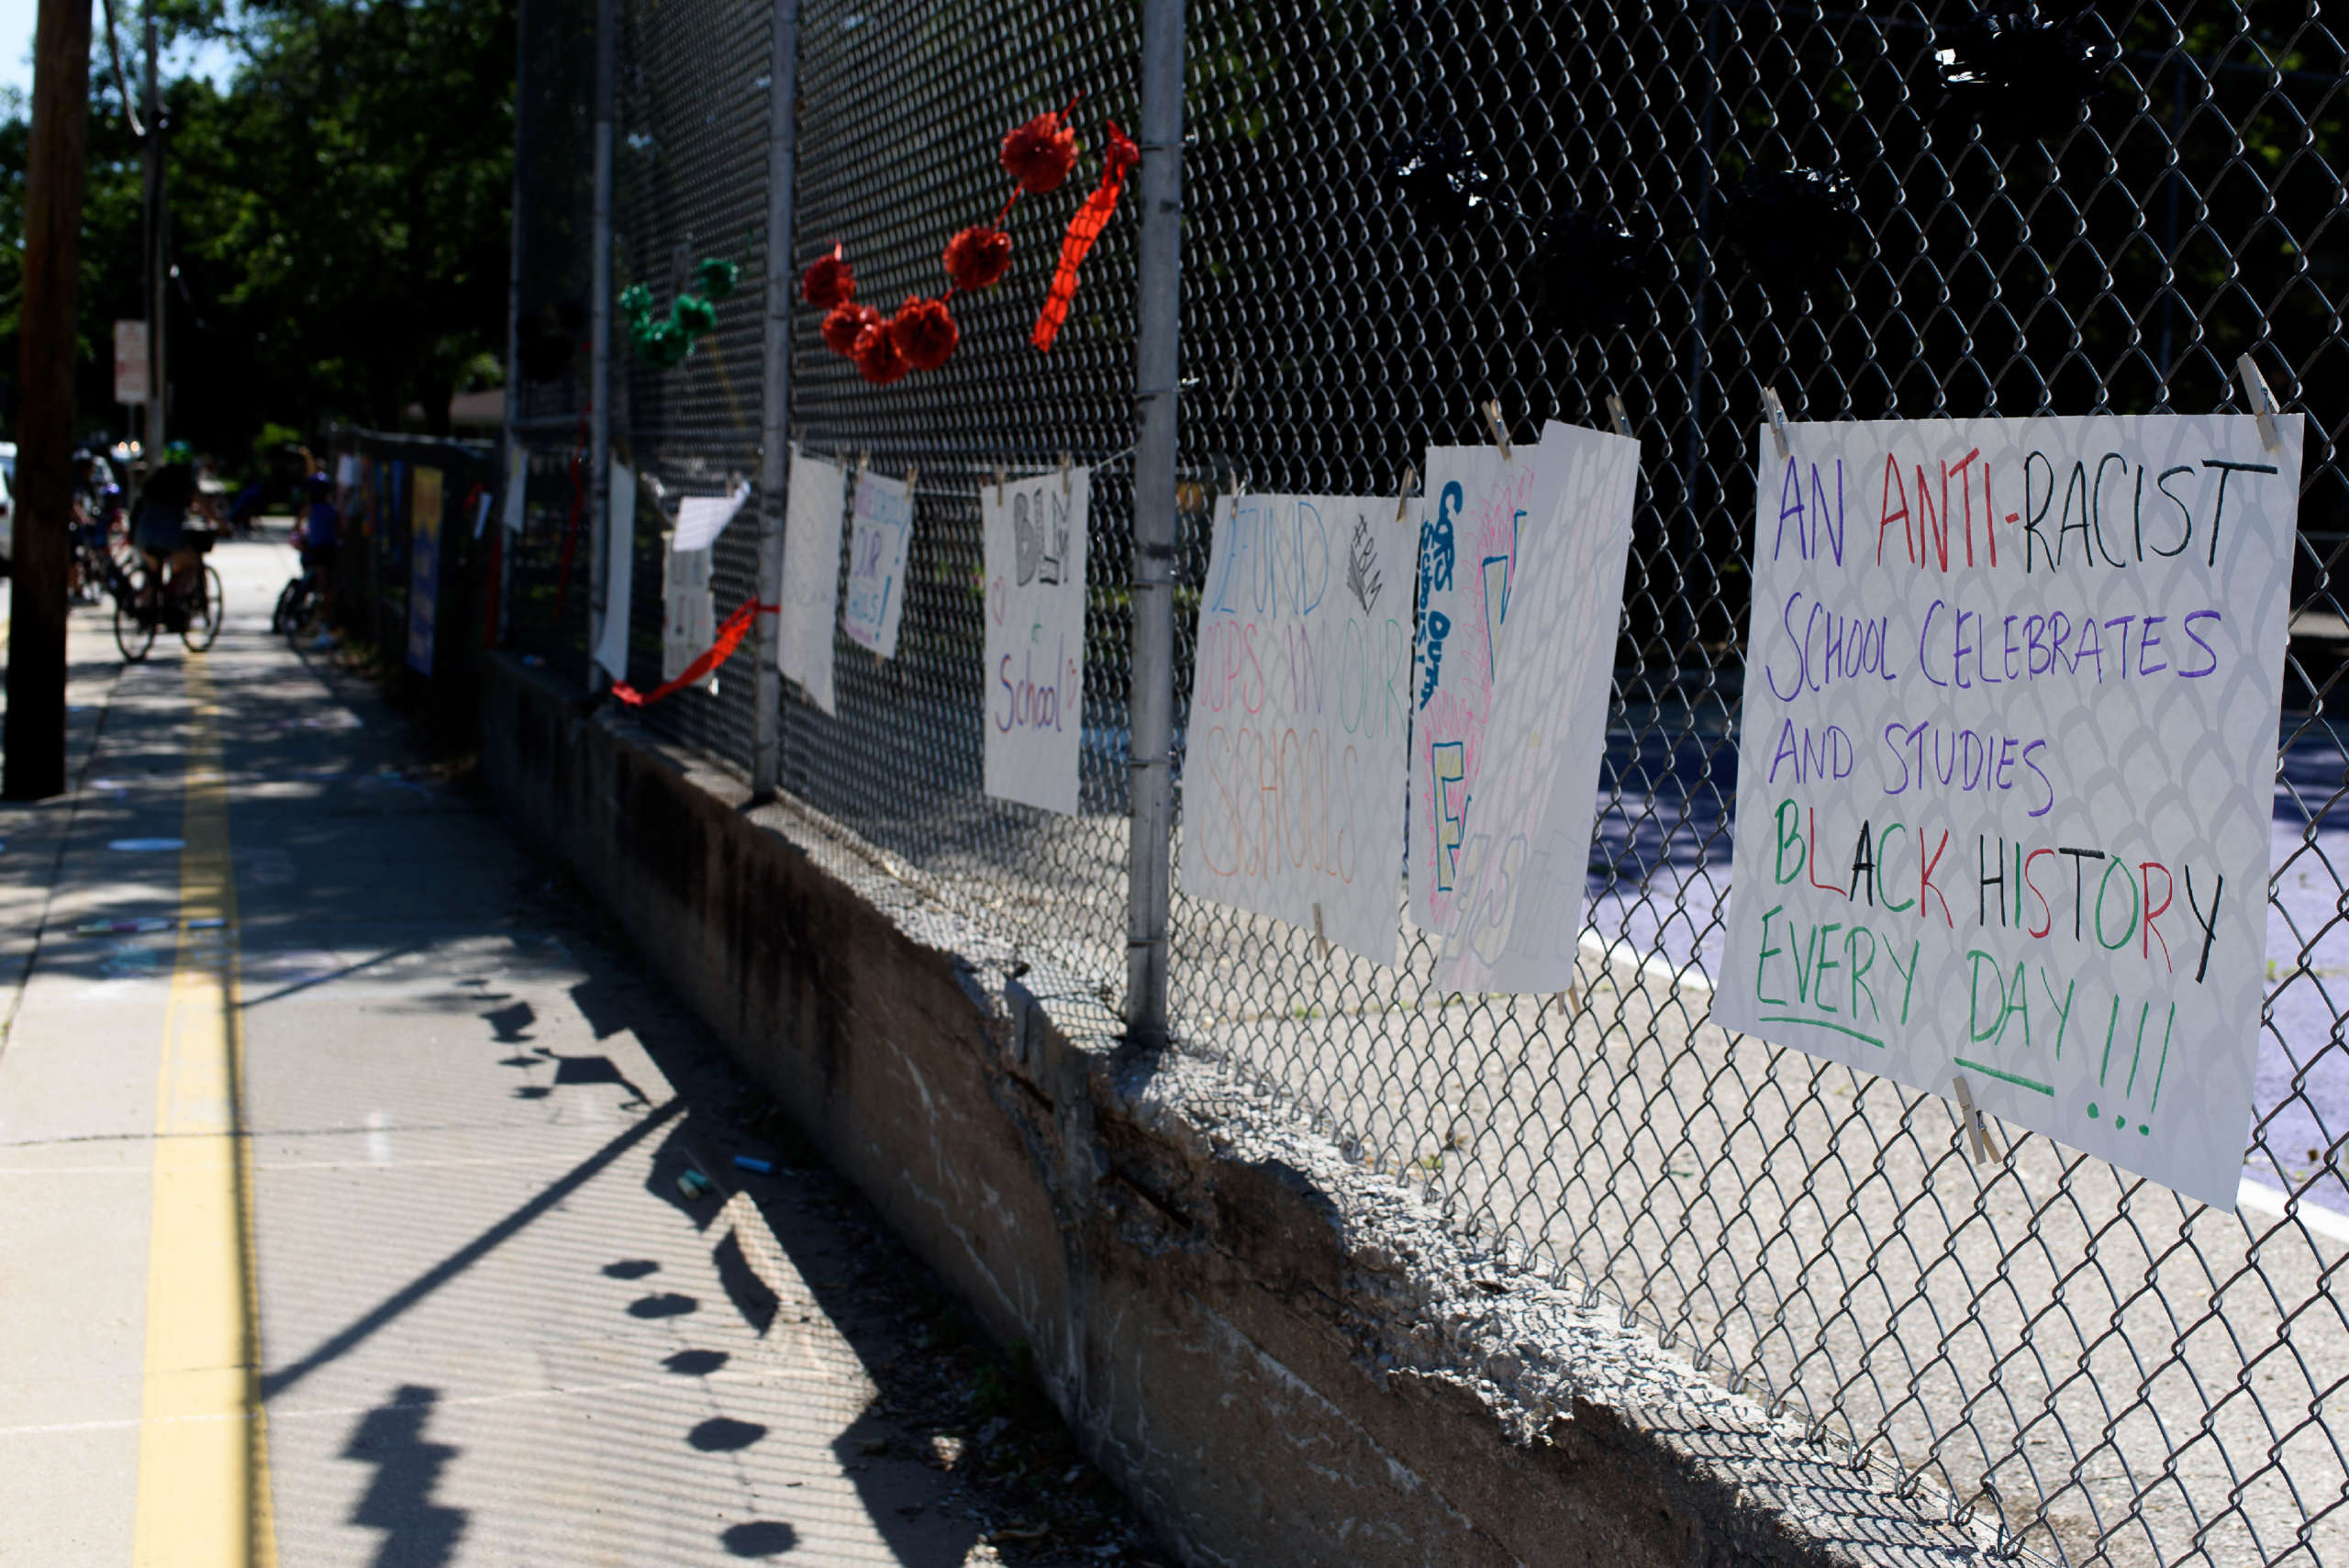 Youth and families’ visions for an antiracist school hang on a fence at an elementary school during a Day of Solidarity action in Madison, Wisconsin.